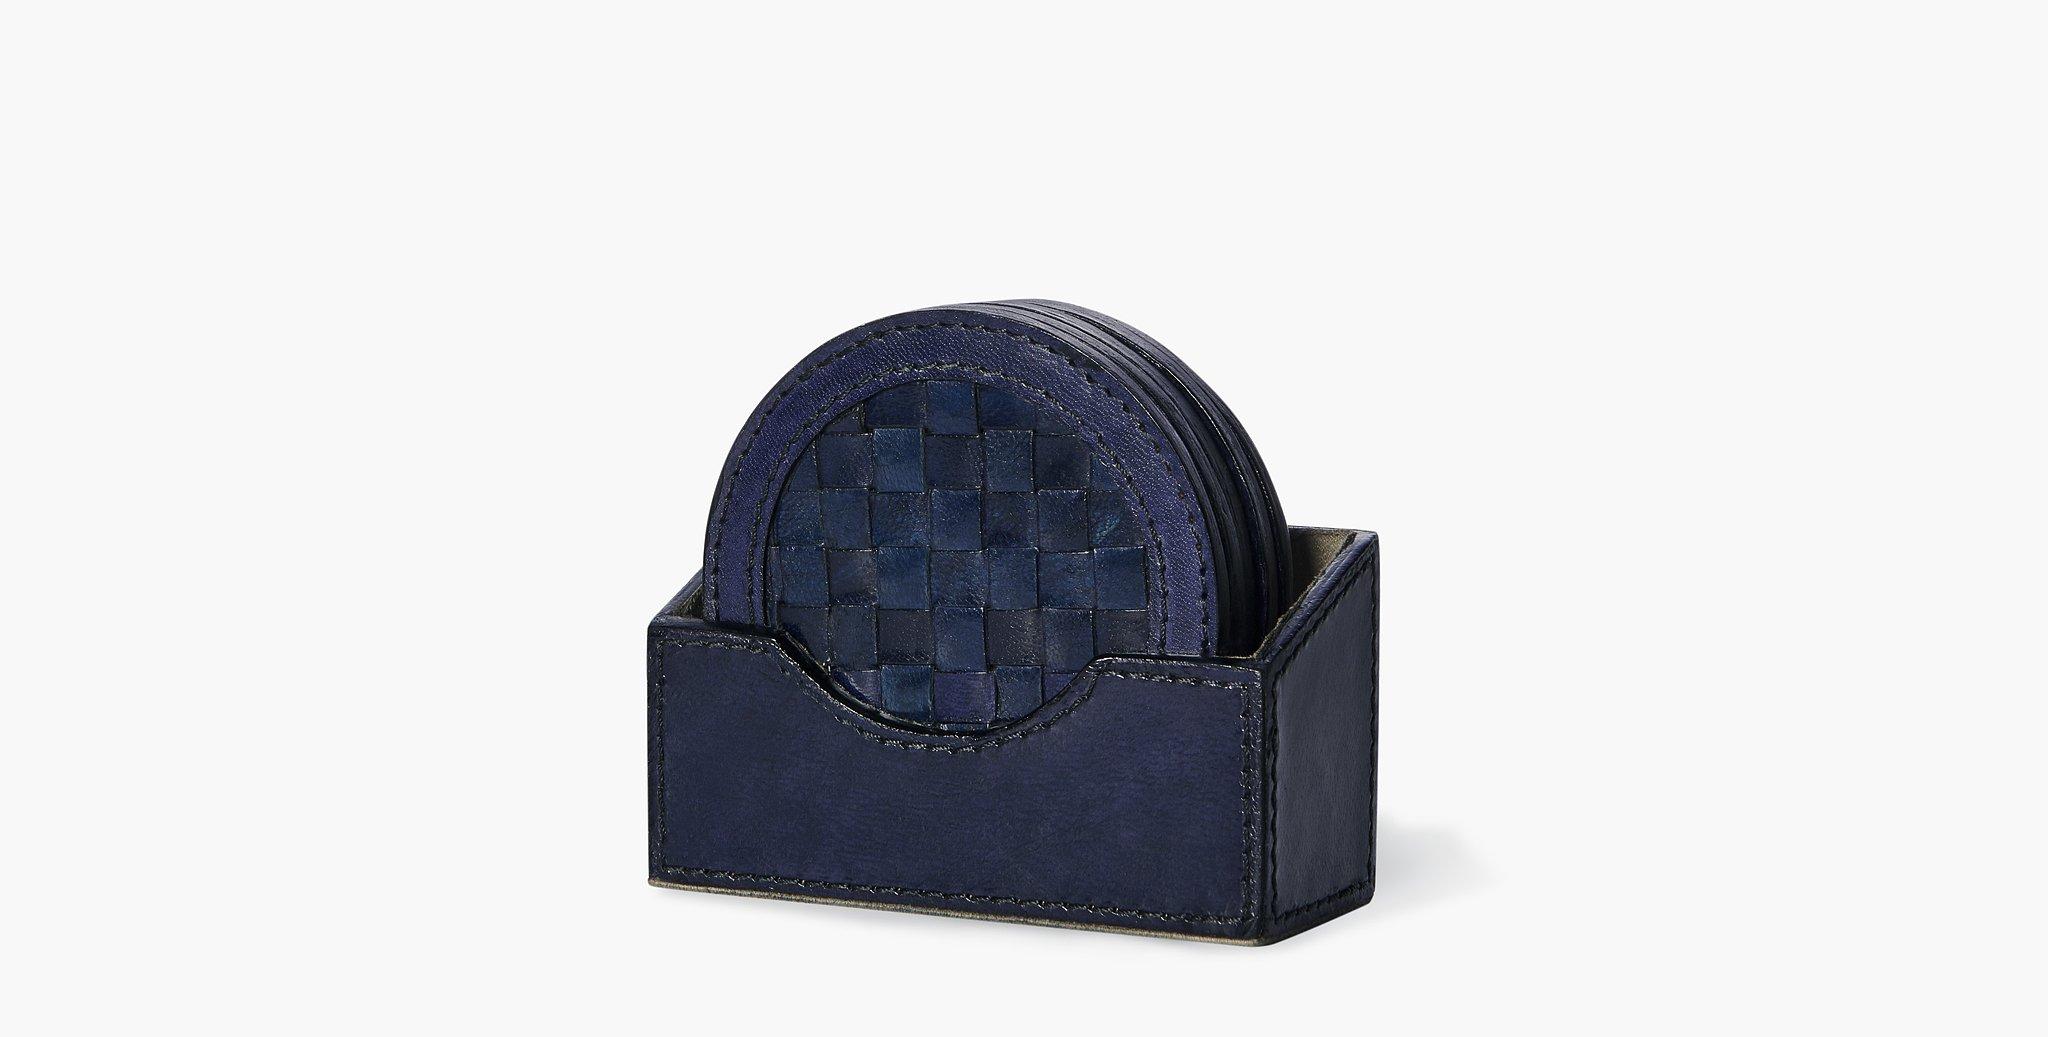 The Clarion Circle Coaster set displays a tightly woven leather design and makes a beautiful textural resting place for your beverages.

Basketweave leather design
Comes with 4 coasters and coaster tray
Imported